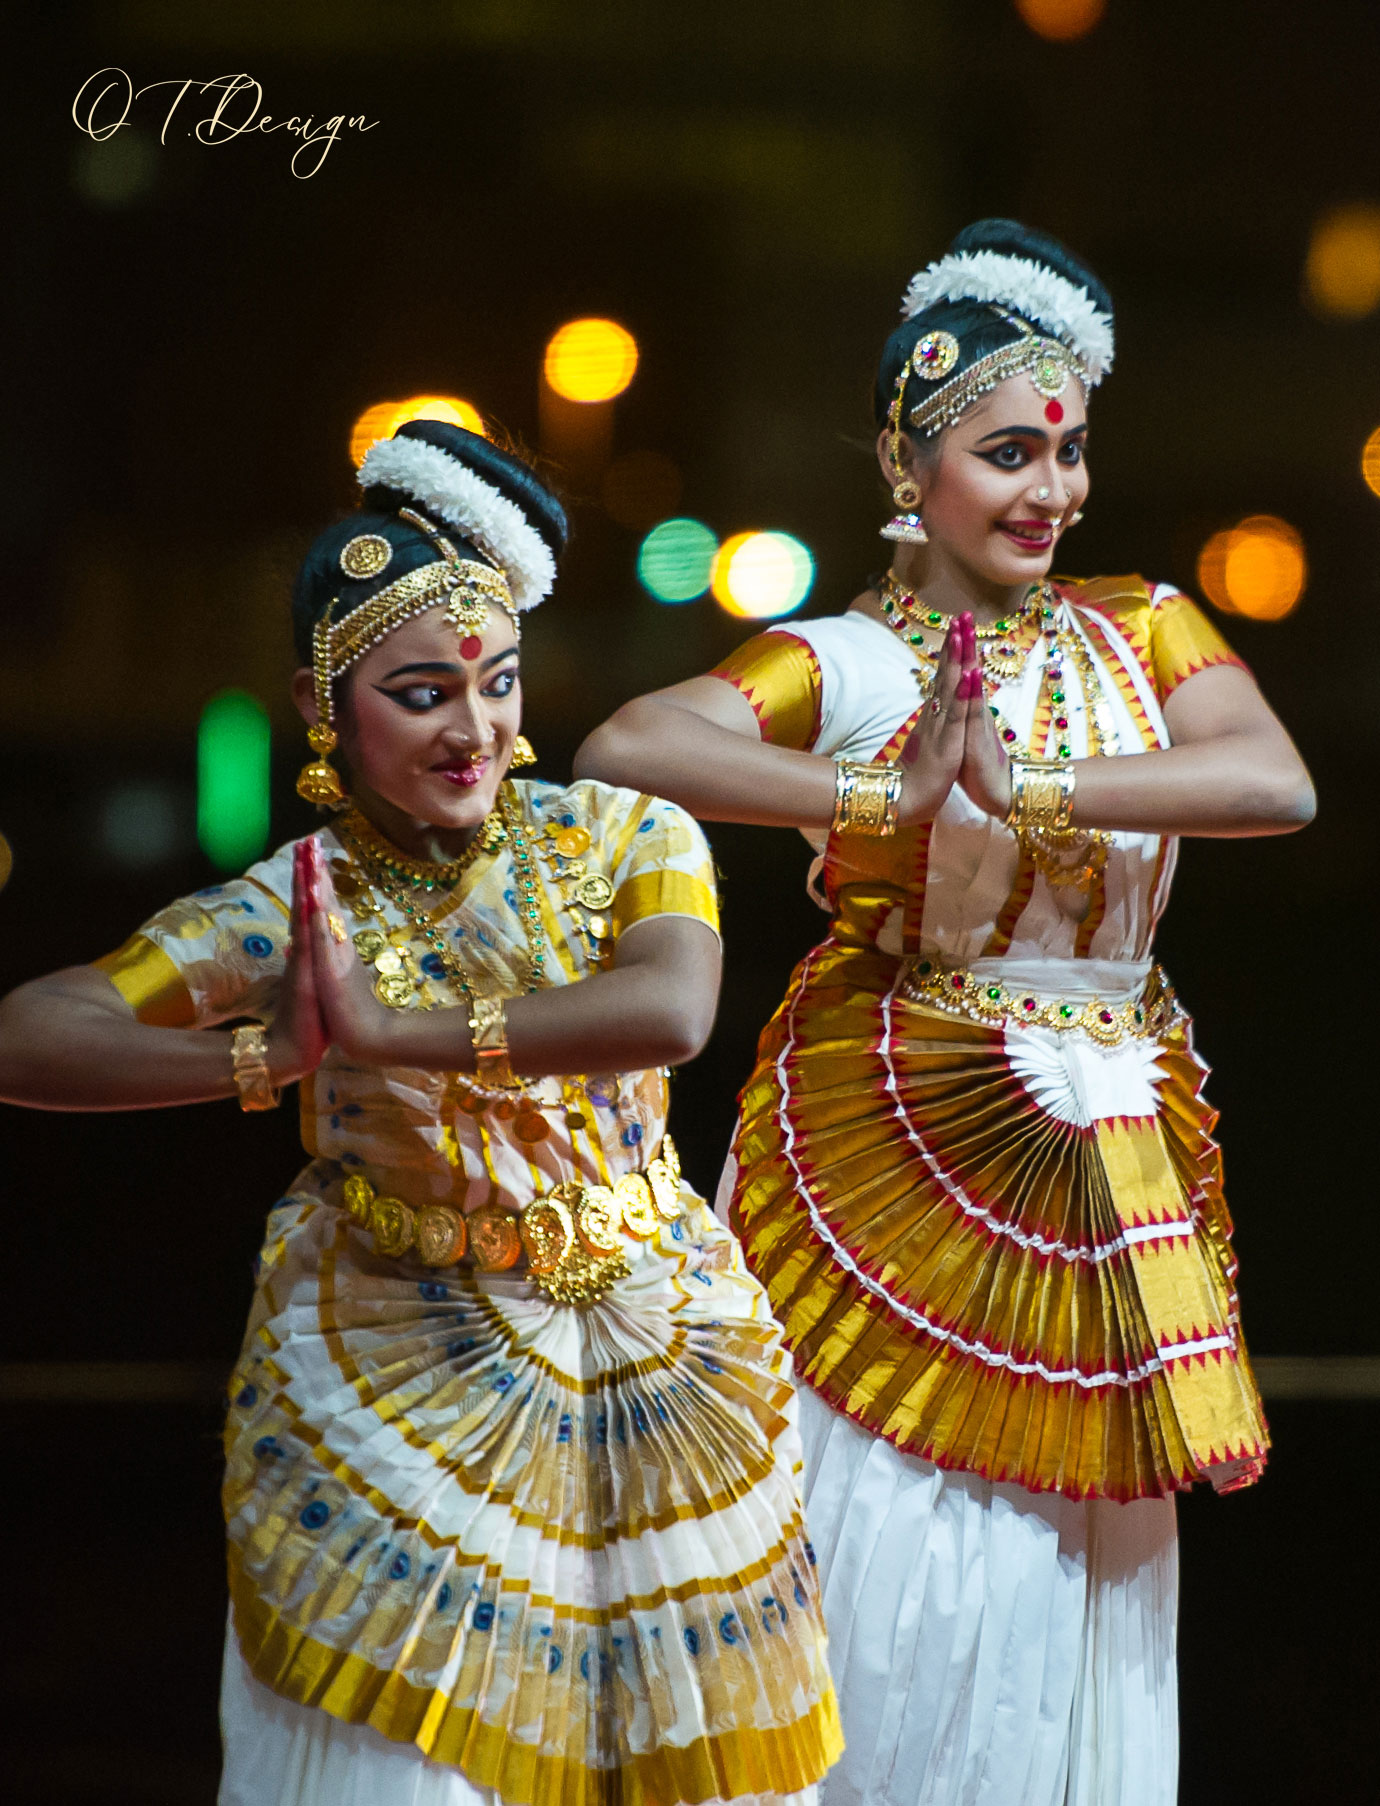 Two ladies performing a traditional dance of Sri Lanka in Colombo